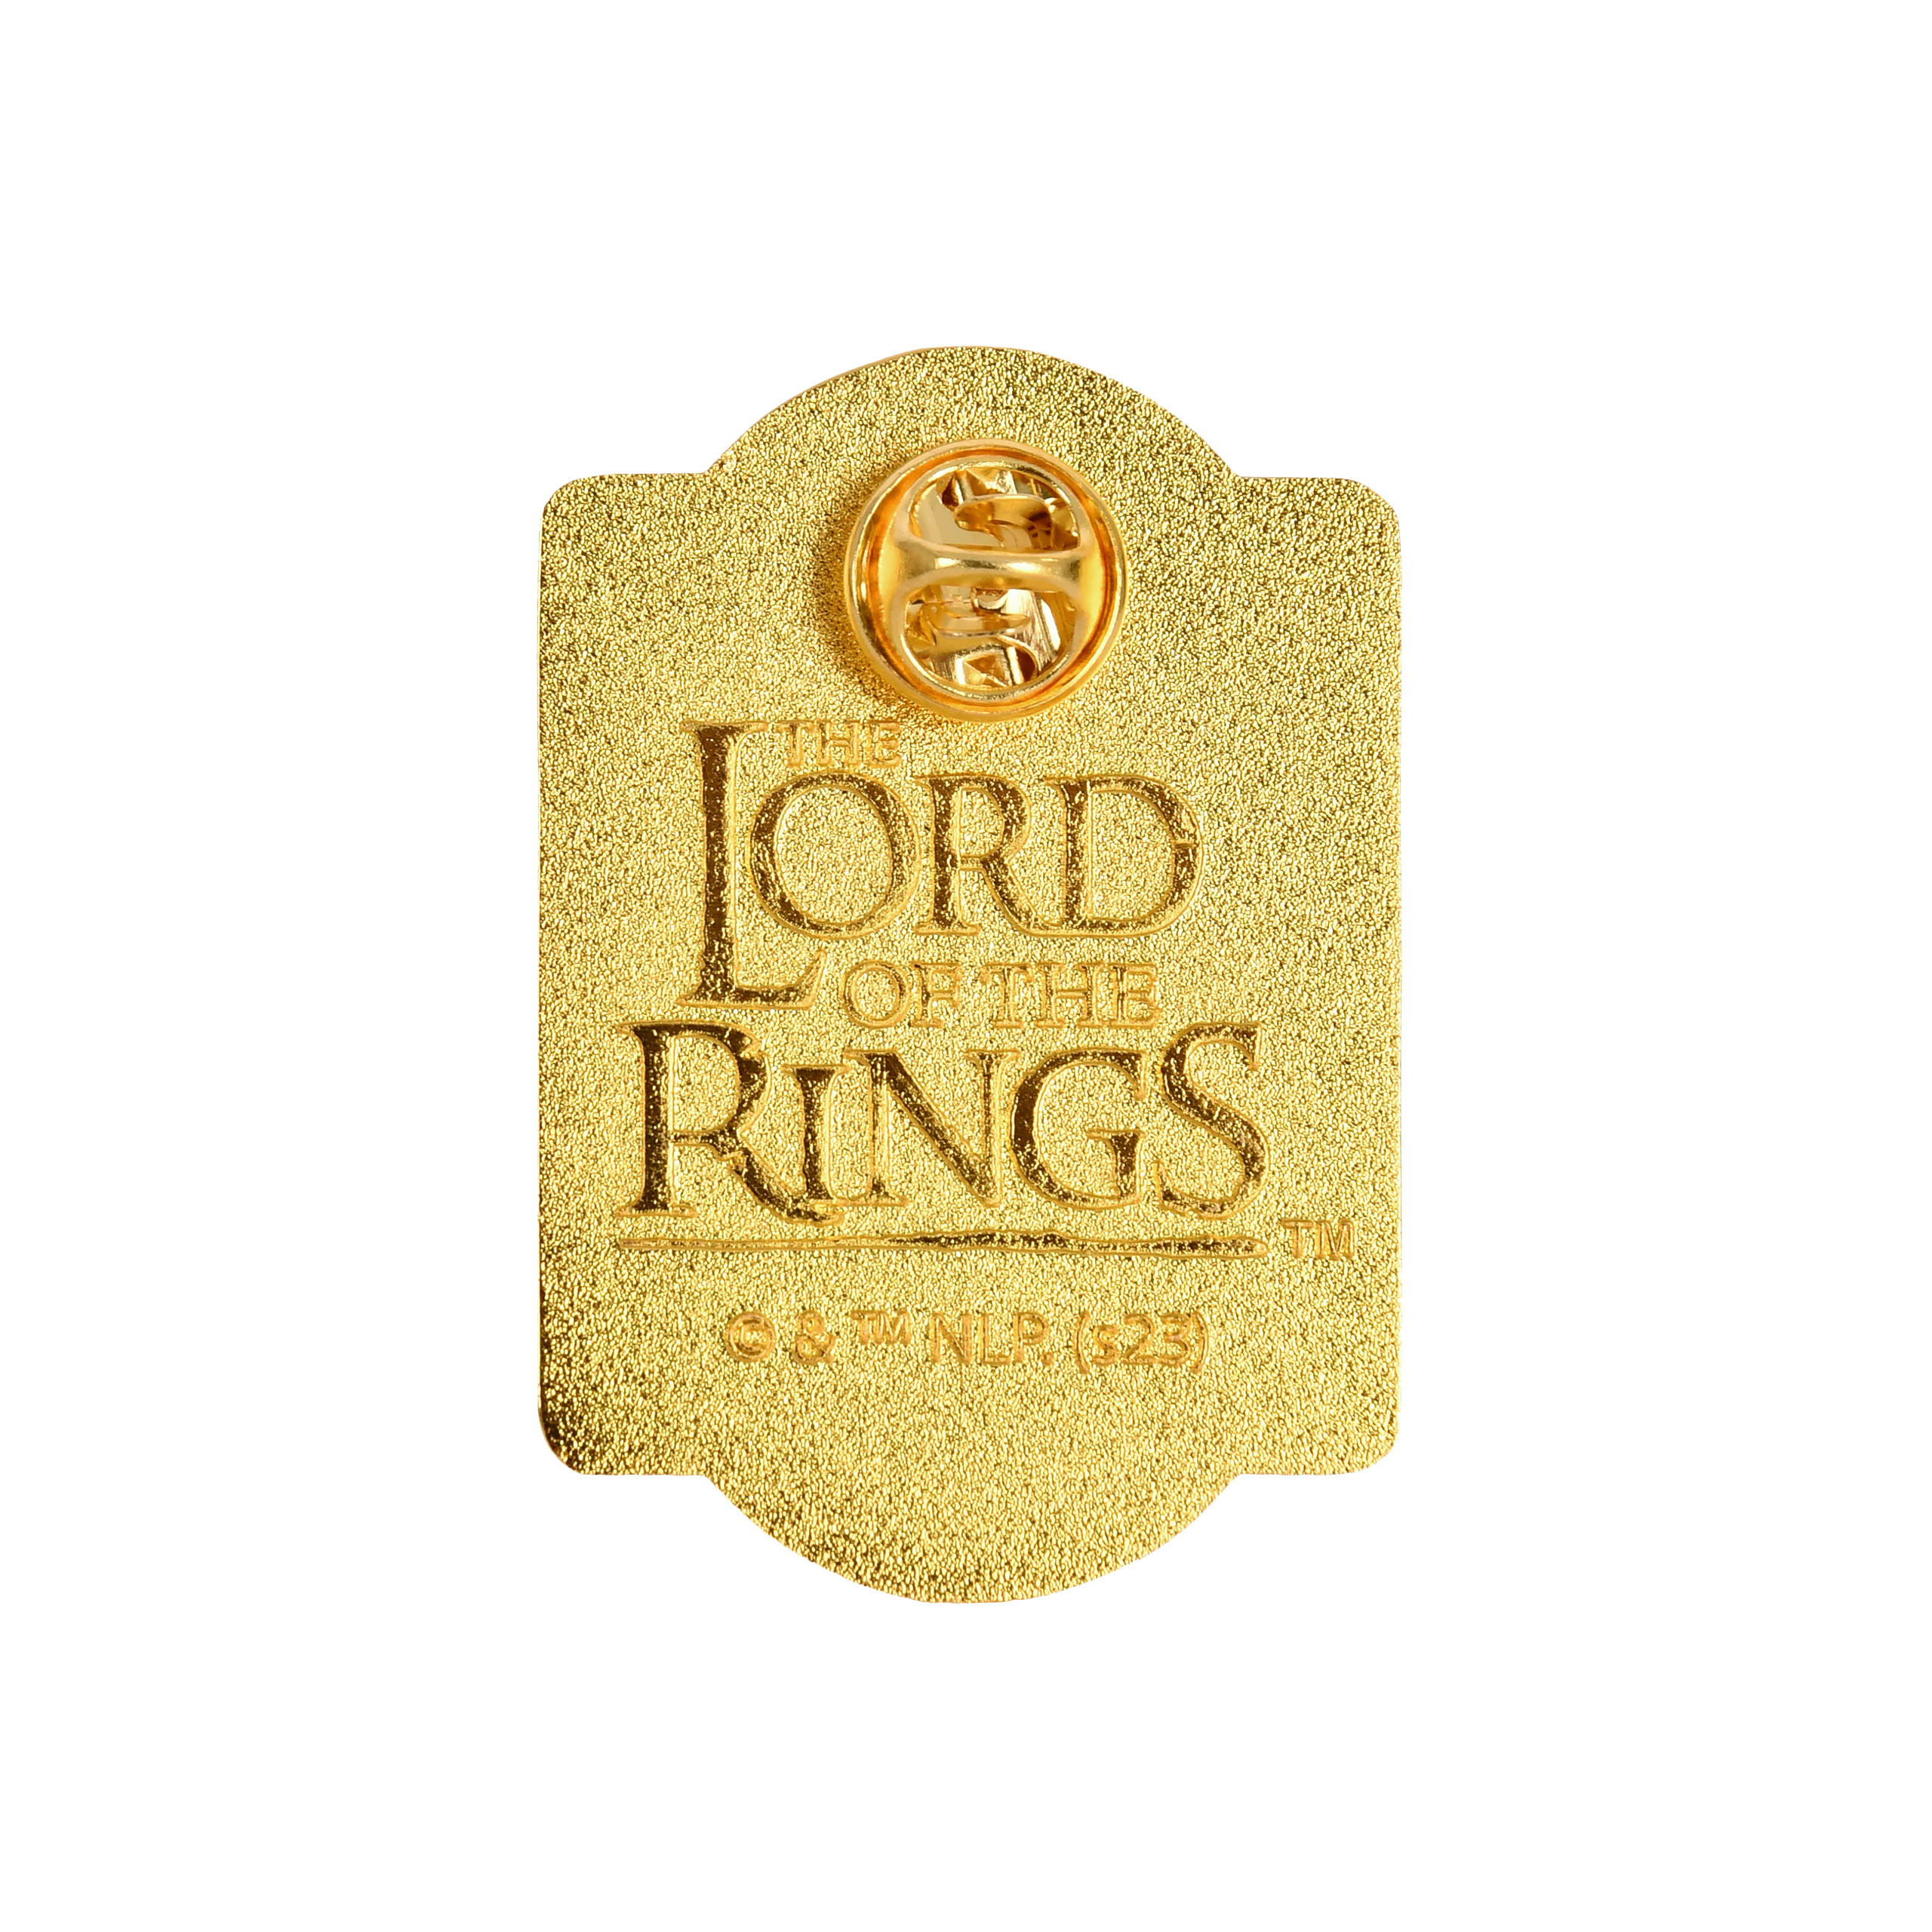 Lord of the Rings - Prancing Pony Pin